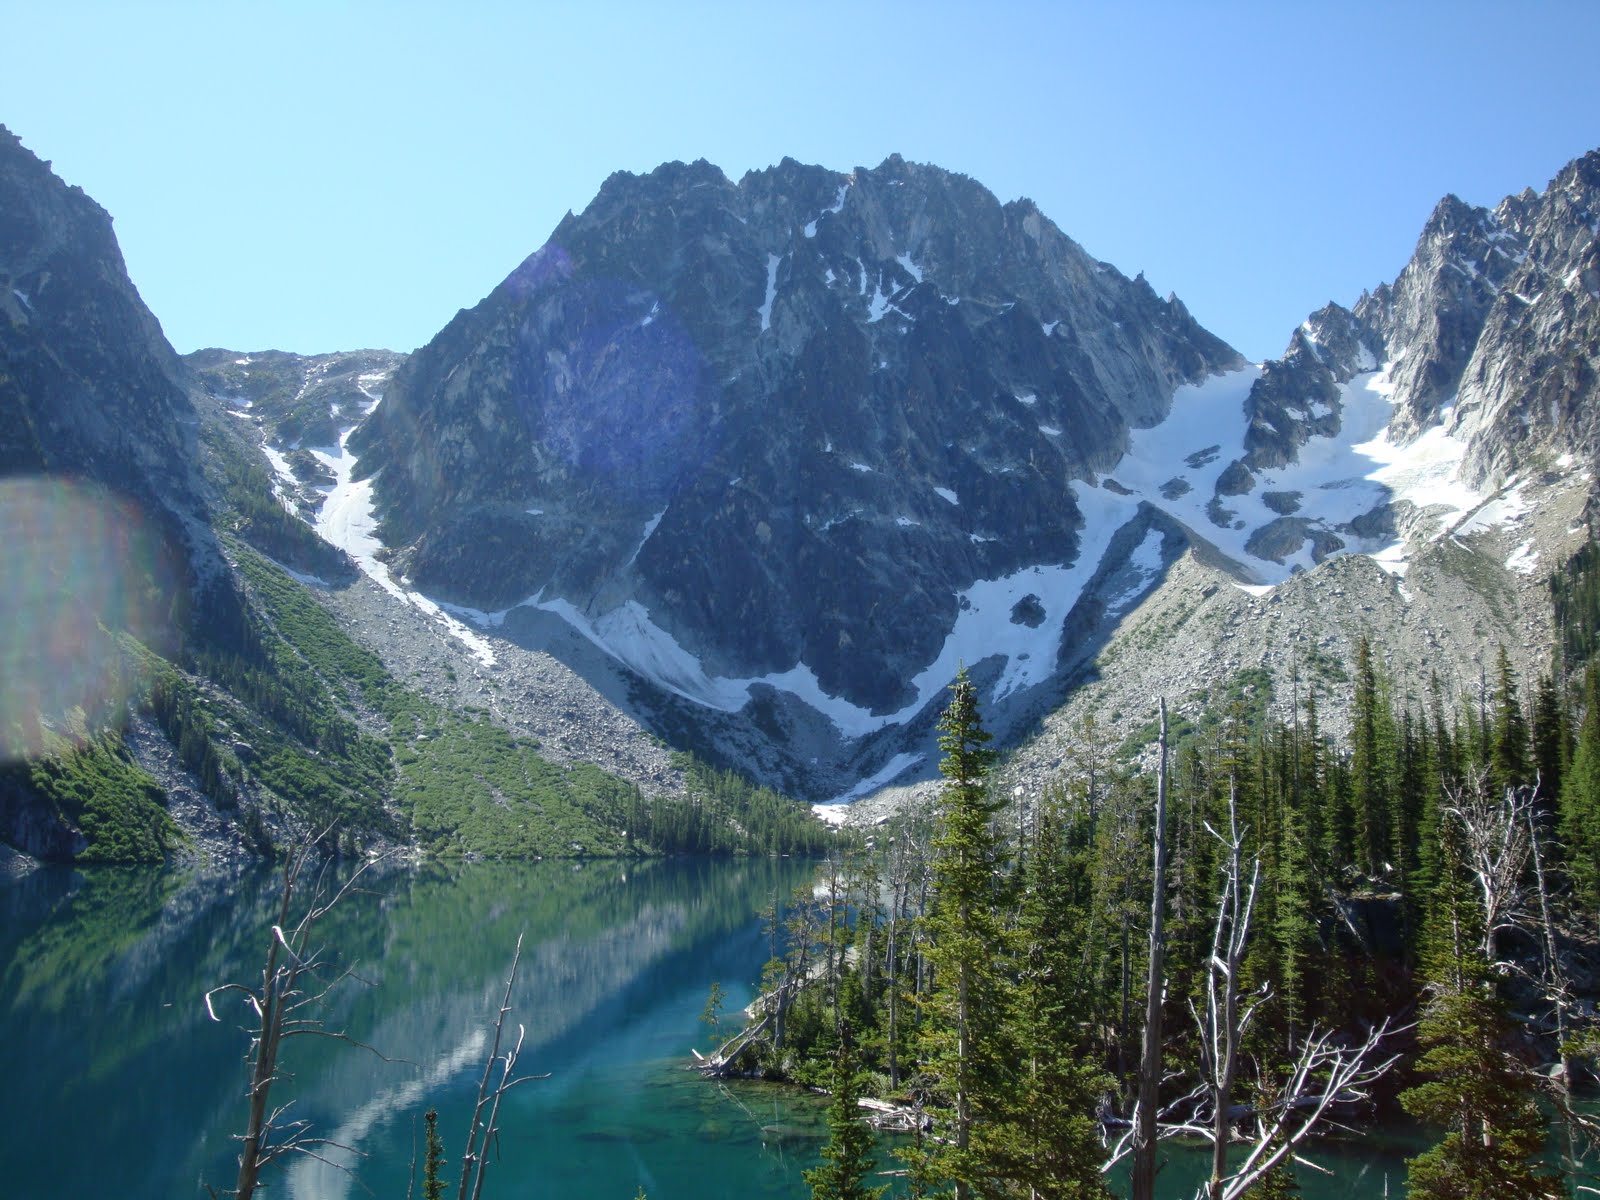 Running on Hops: The Enchantments